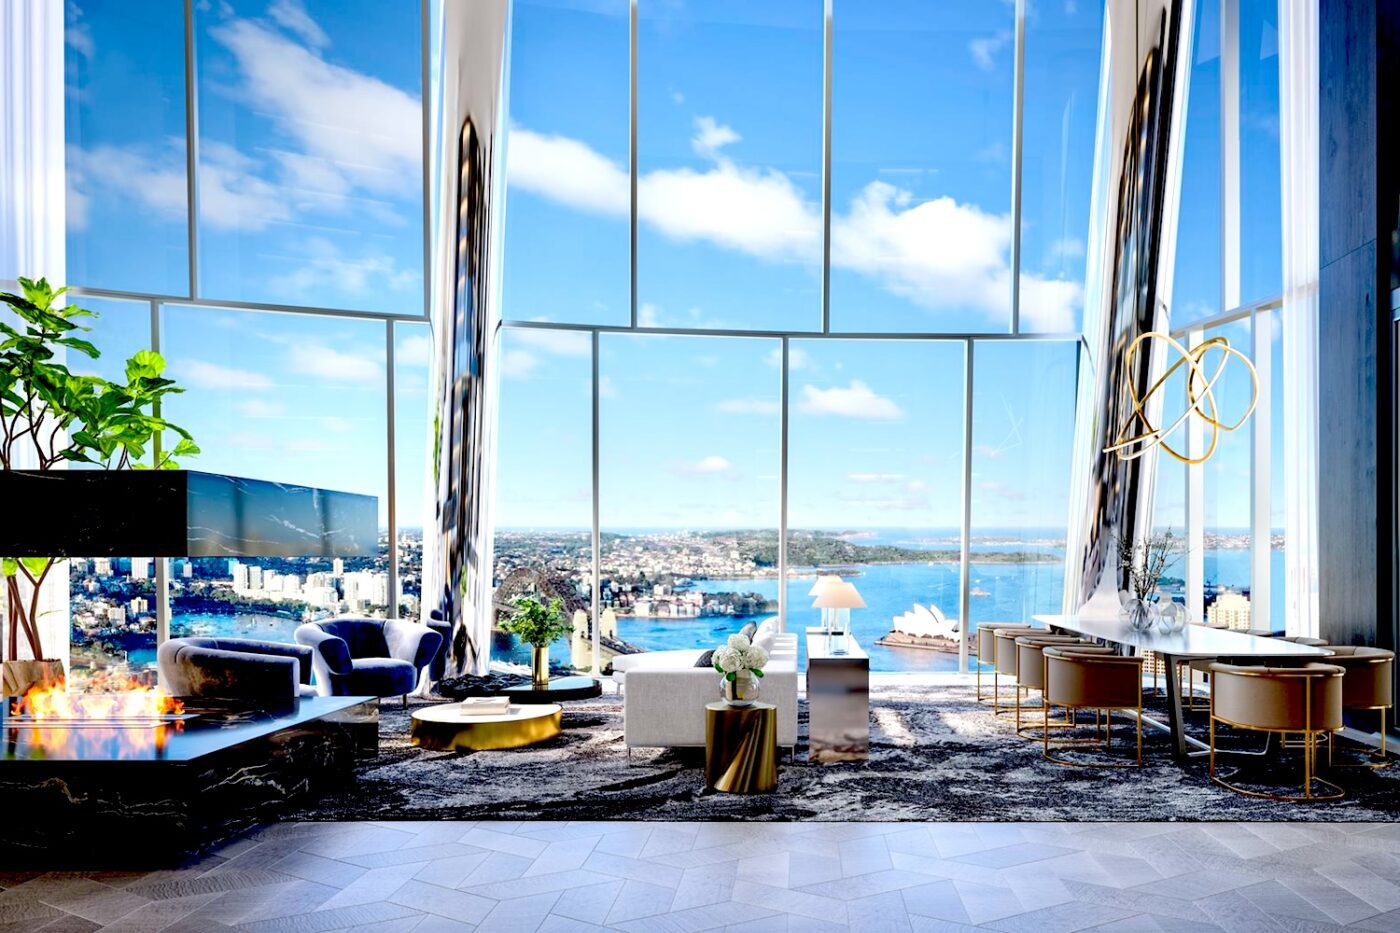 Realtors Reveal Why Nobody Wants This $100m Penthouse Destined For AirBnB